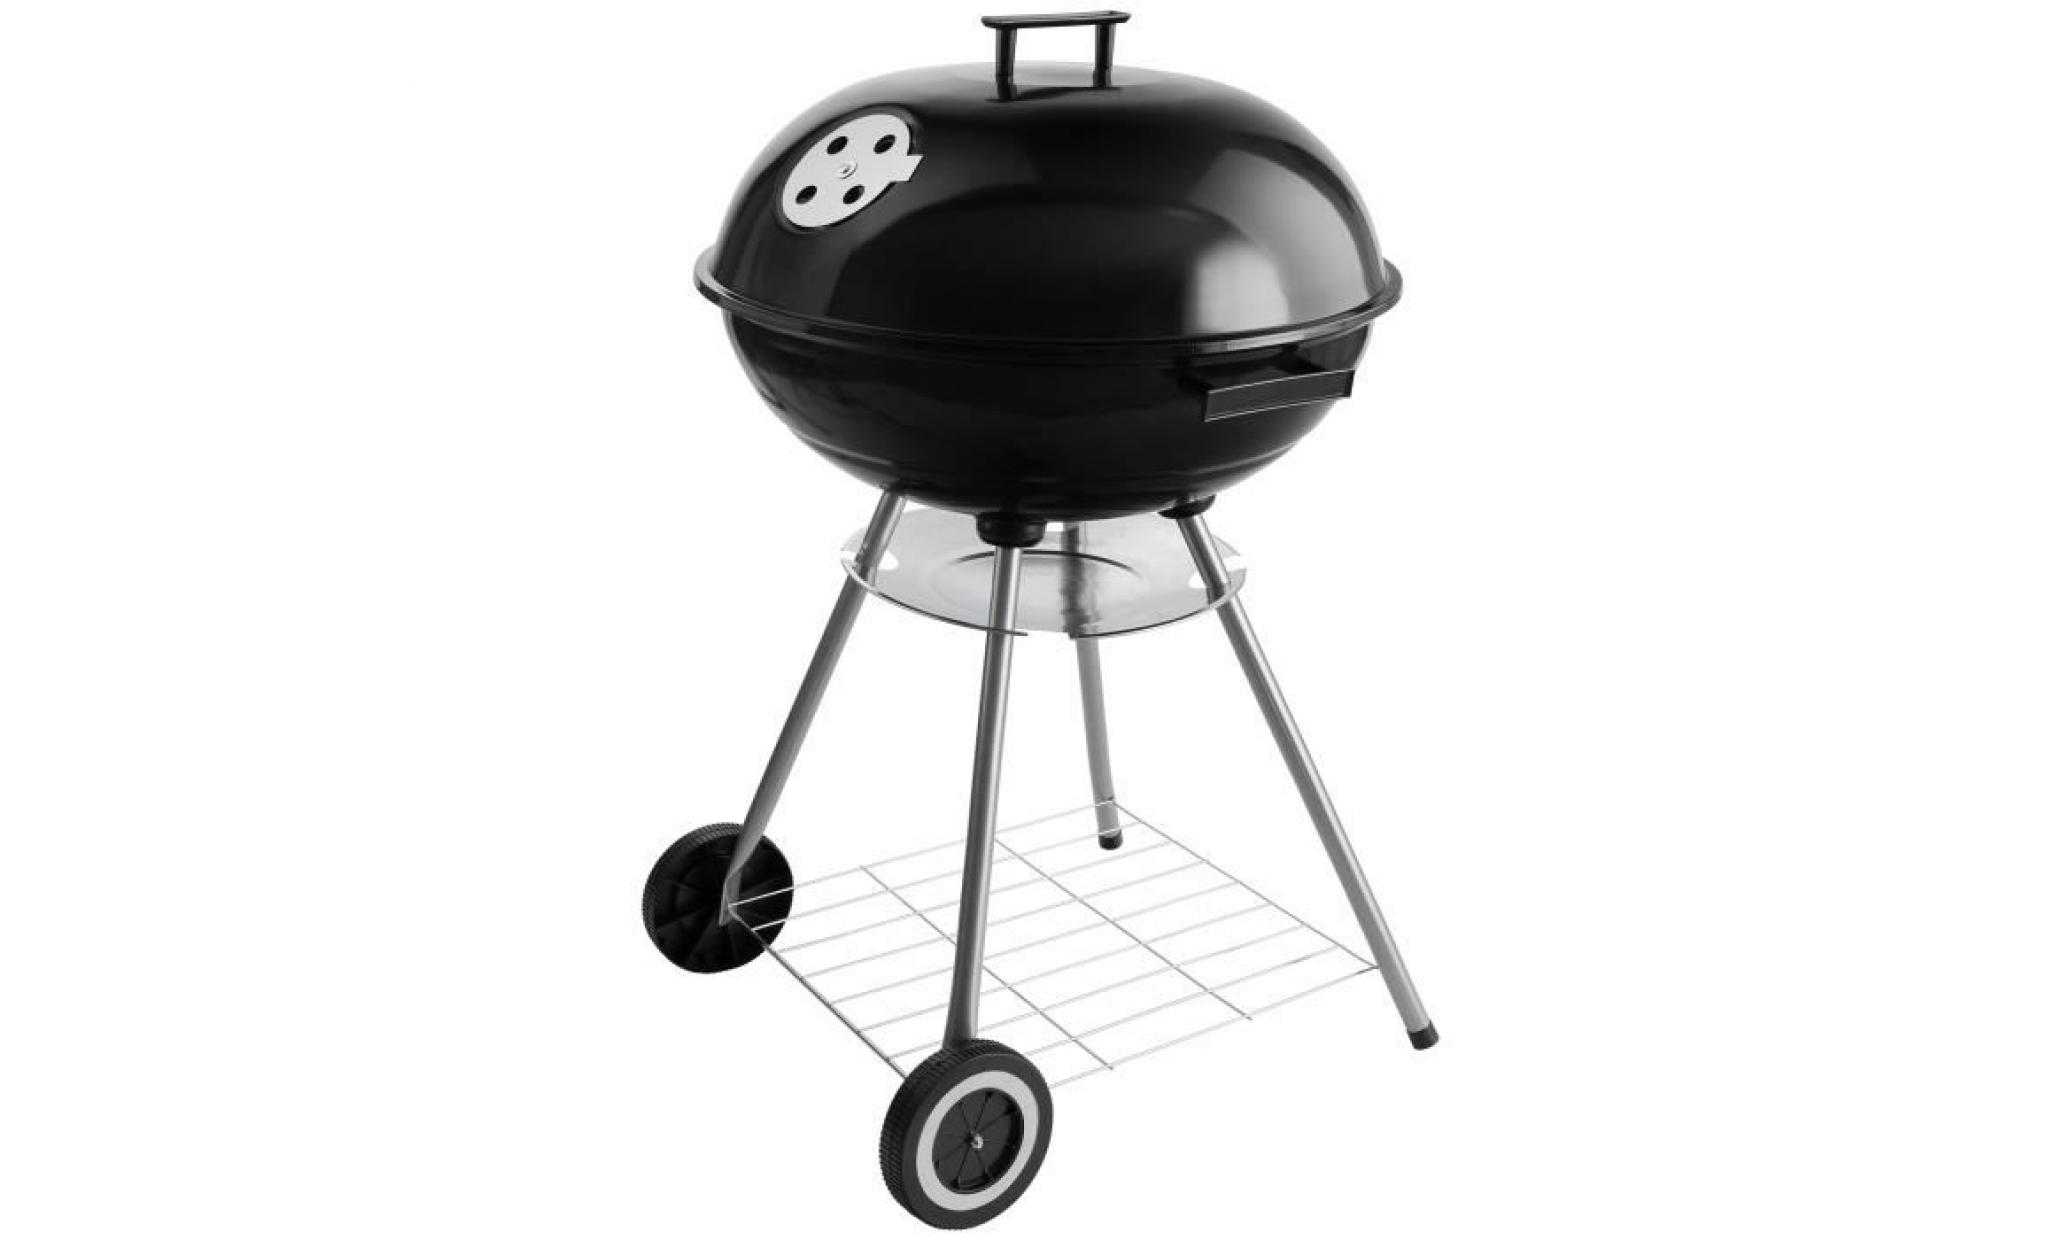 arebos barbecue boule barbecue grille bbq rond mobile acier inoxydable 46 cm pas cher